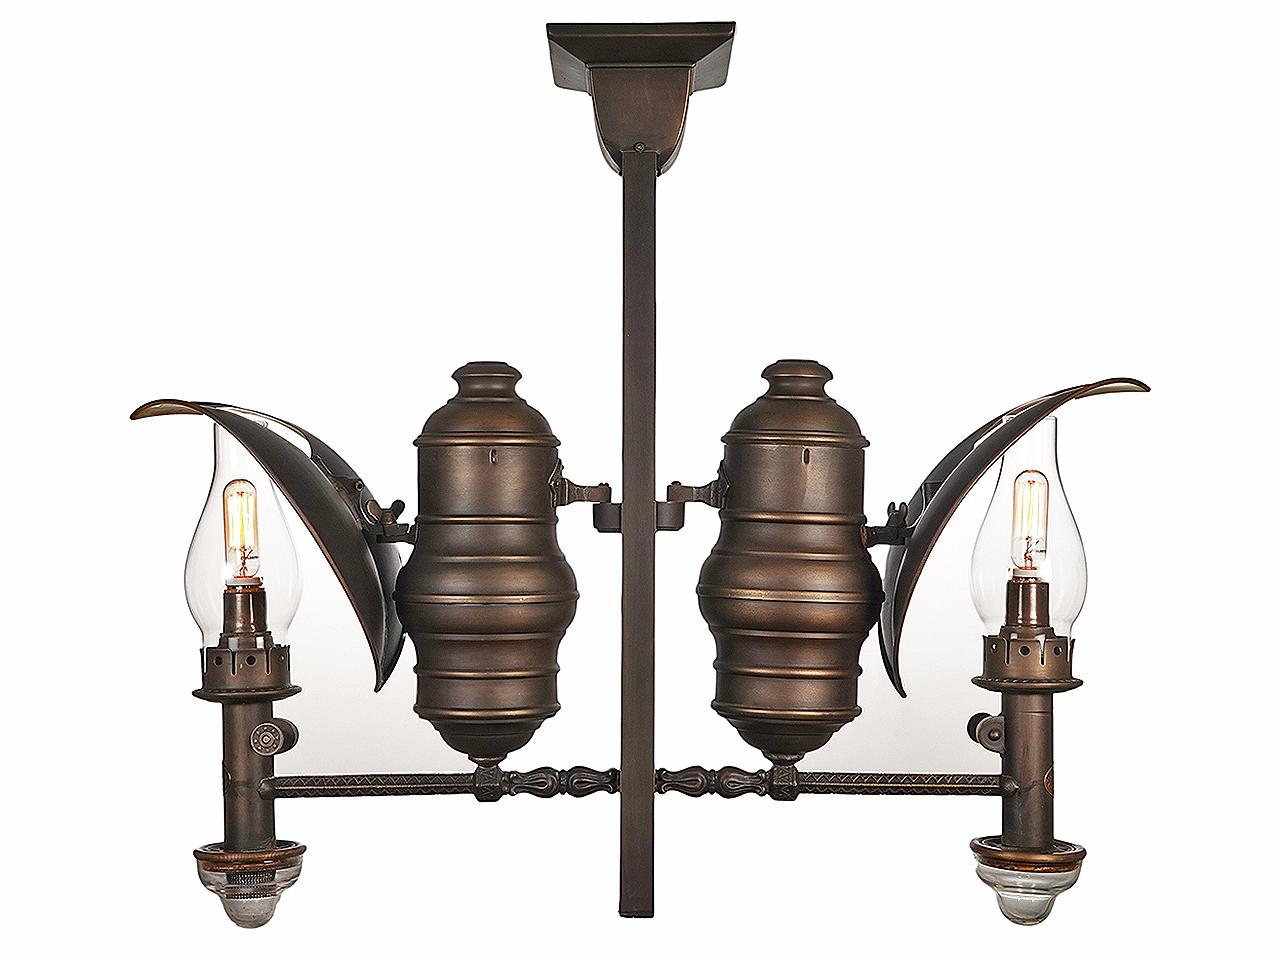 The lamp is signed Adams And Westlake Railroad Chandelier. We found turn of the century catalogue rendering/listings of this type of lamp. The Adlake book calls it a postal-lamp. It's rare when you have the chance to purchase objects from an